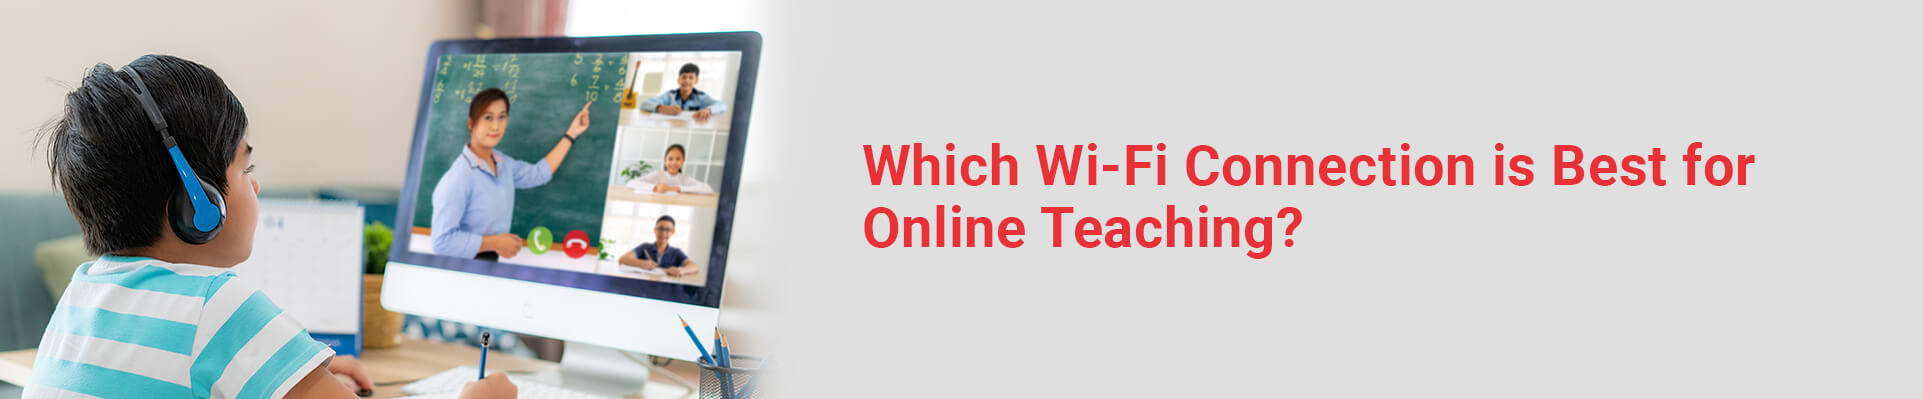 Which Wi-Fi Connection is Best for Online Teaching?